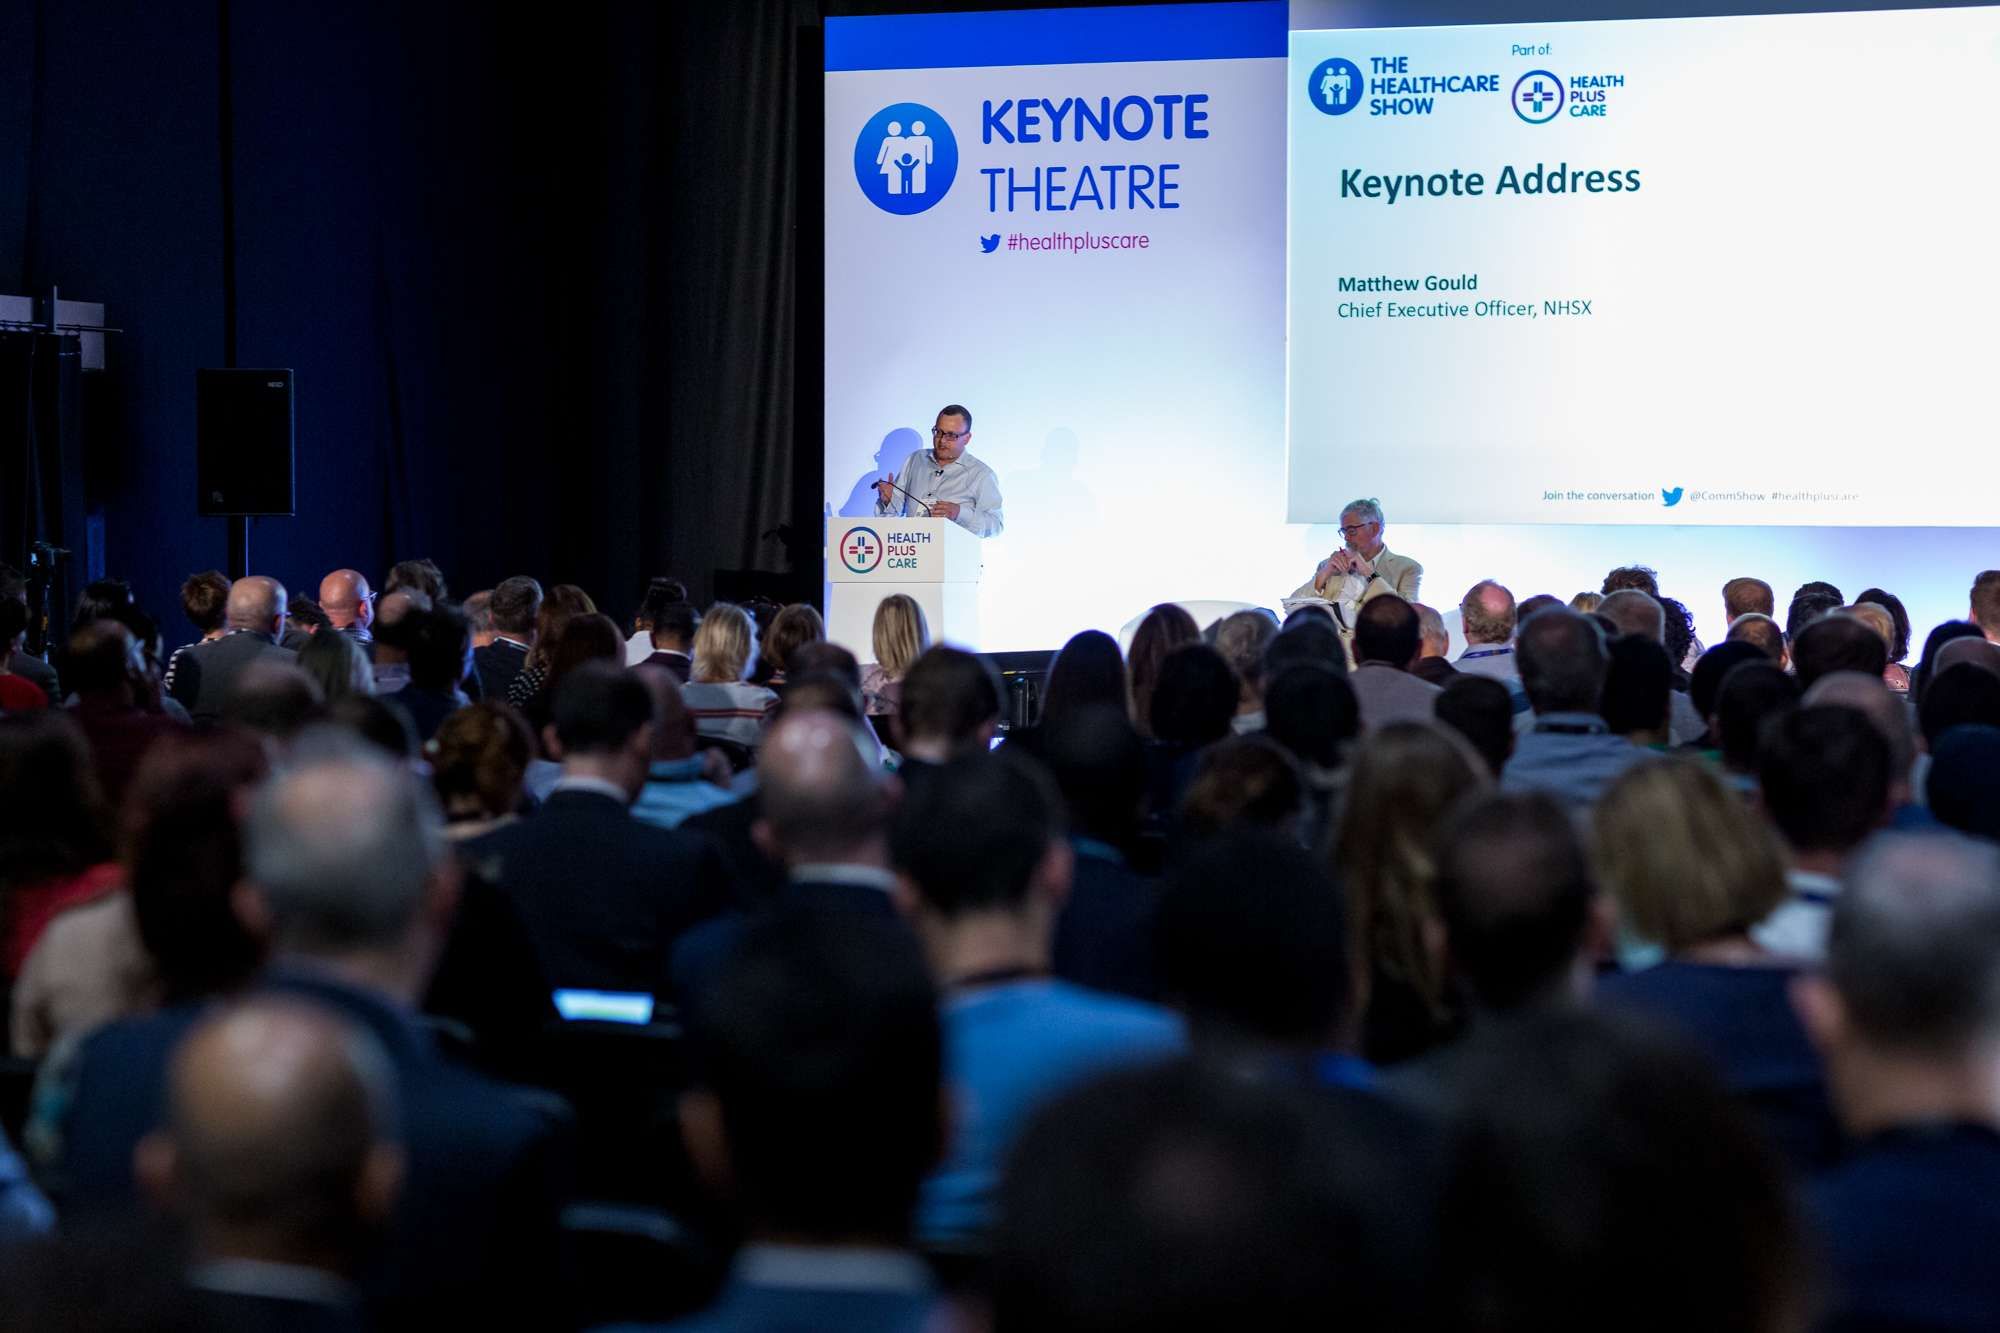 300 Senior Leaders in Healthcare Confirmed to Present at The Healthcare Show, Part of Health Plus Care